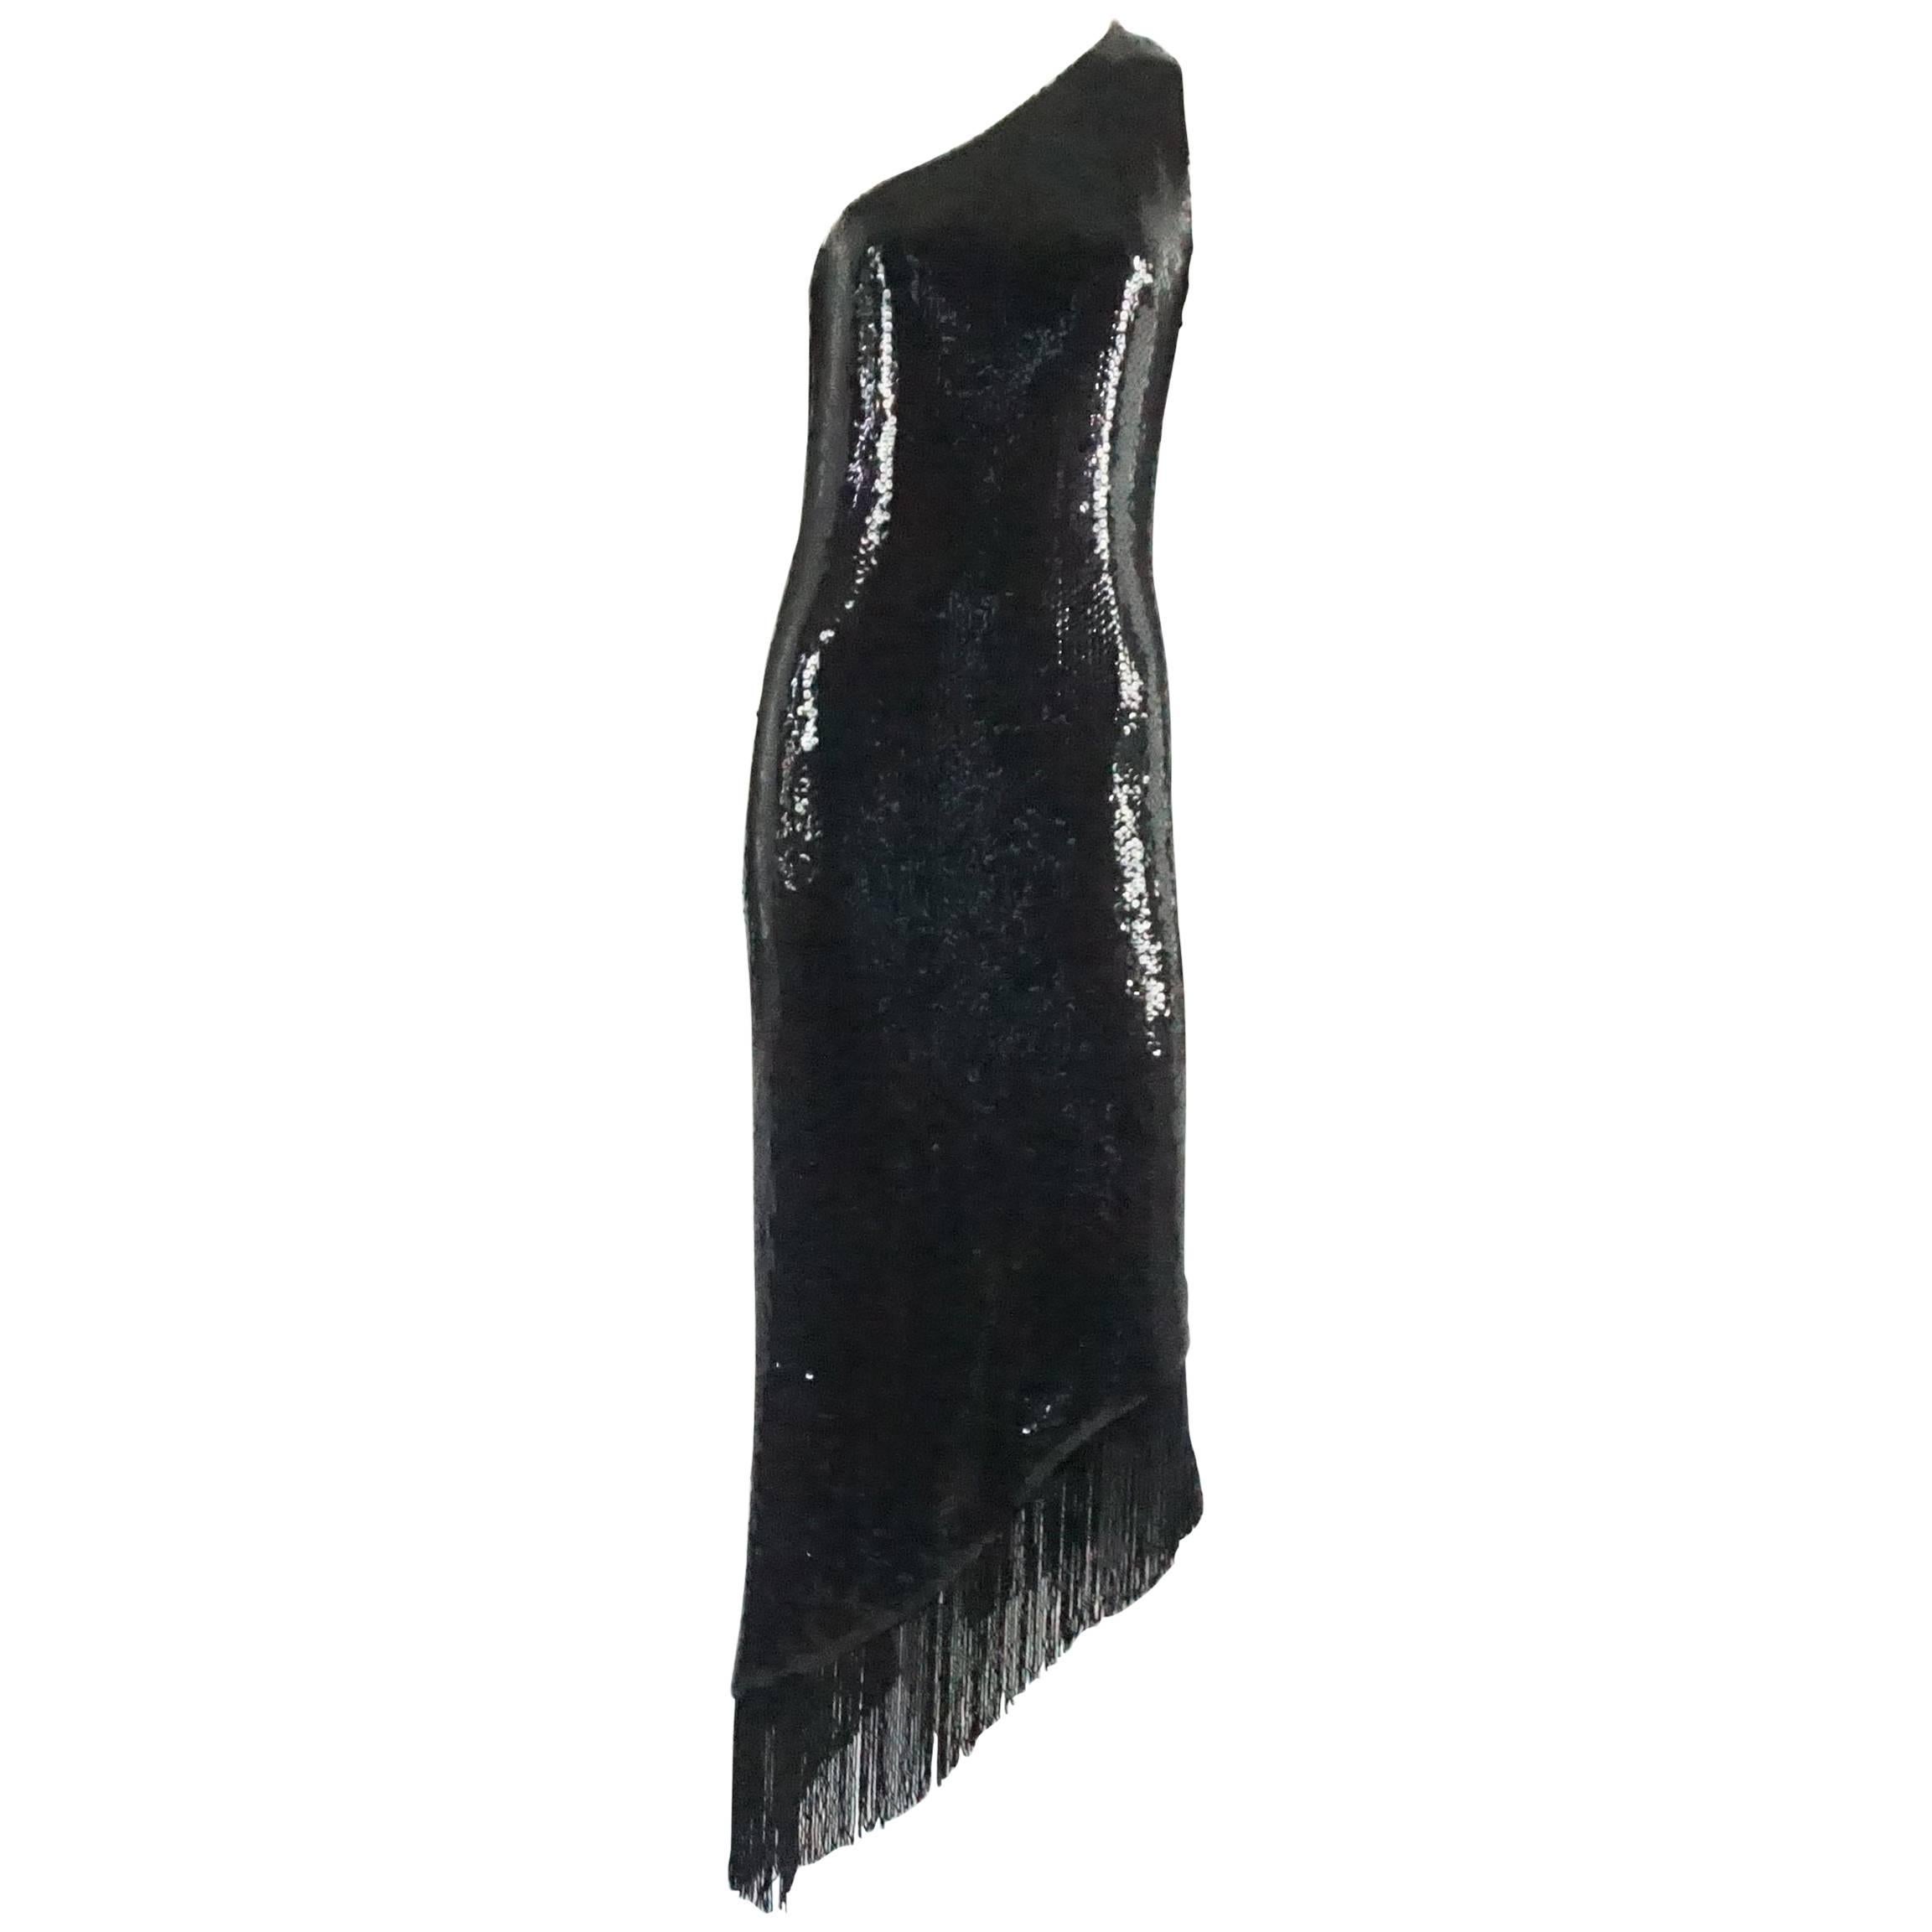 Bill Blass Black Sequin One Shoulder Gown with Beaded Fringe - M - 1970's